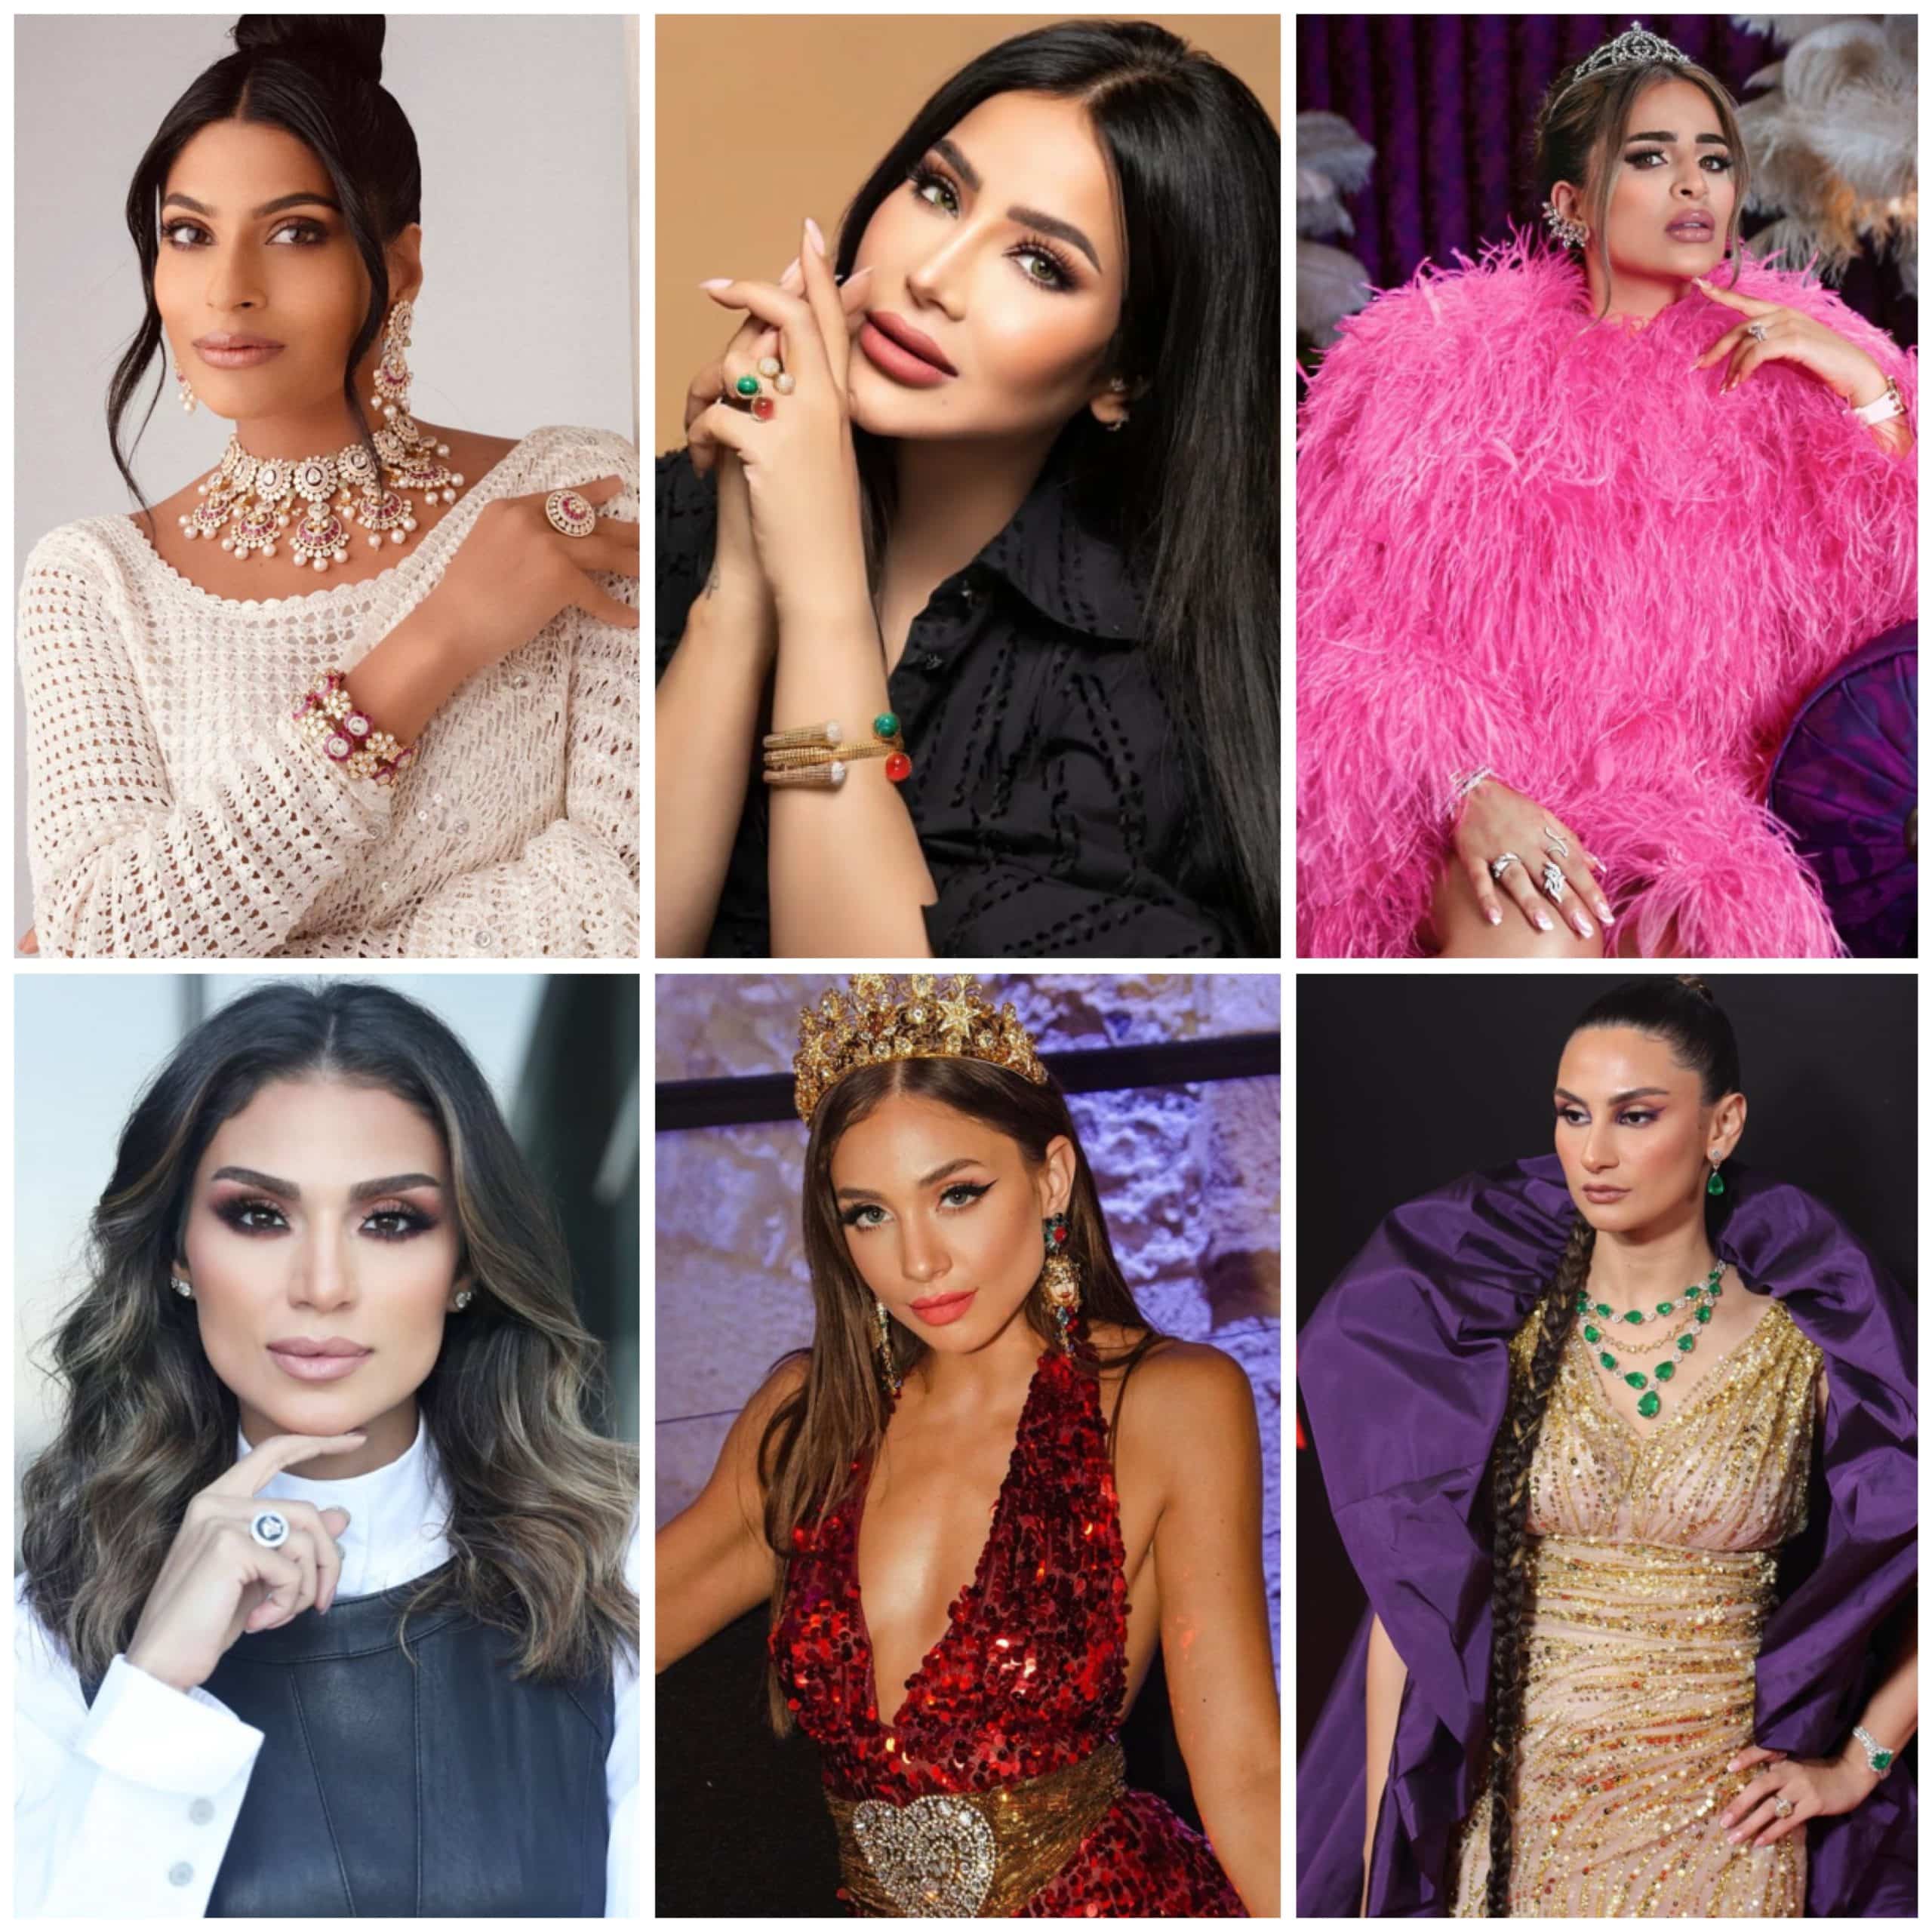 Read more about the article The 6 Women of Dubai Bling and Their Sexy Handbags